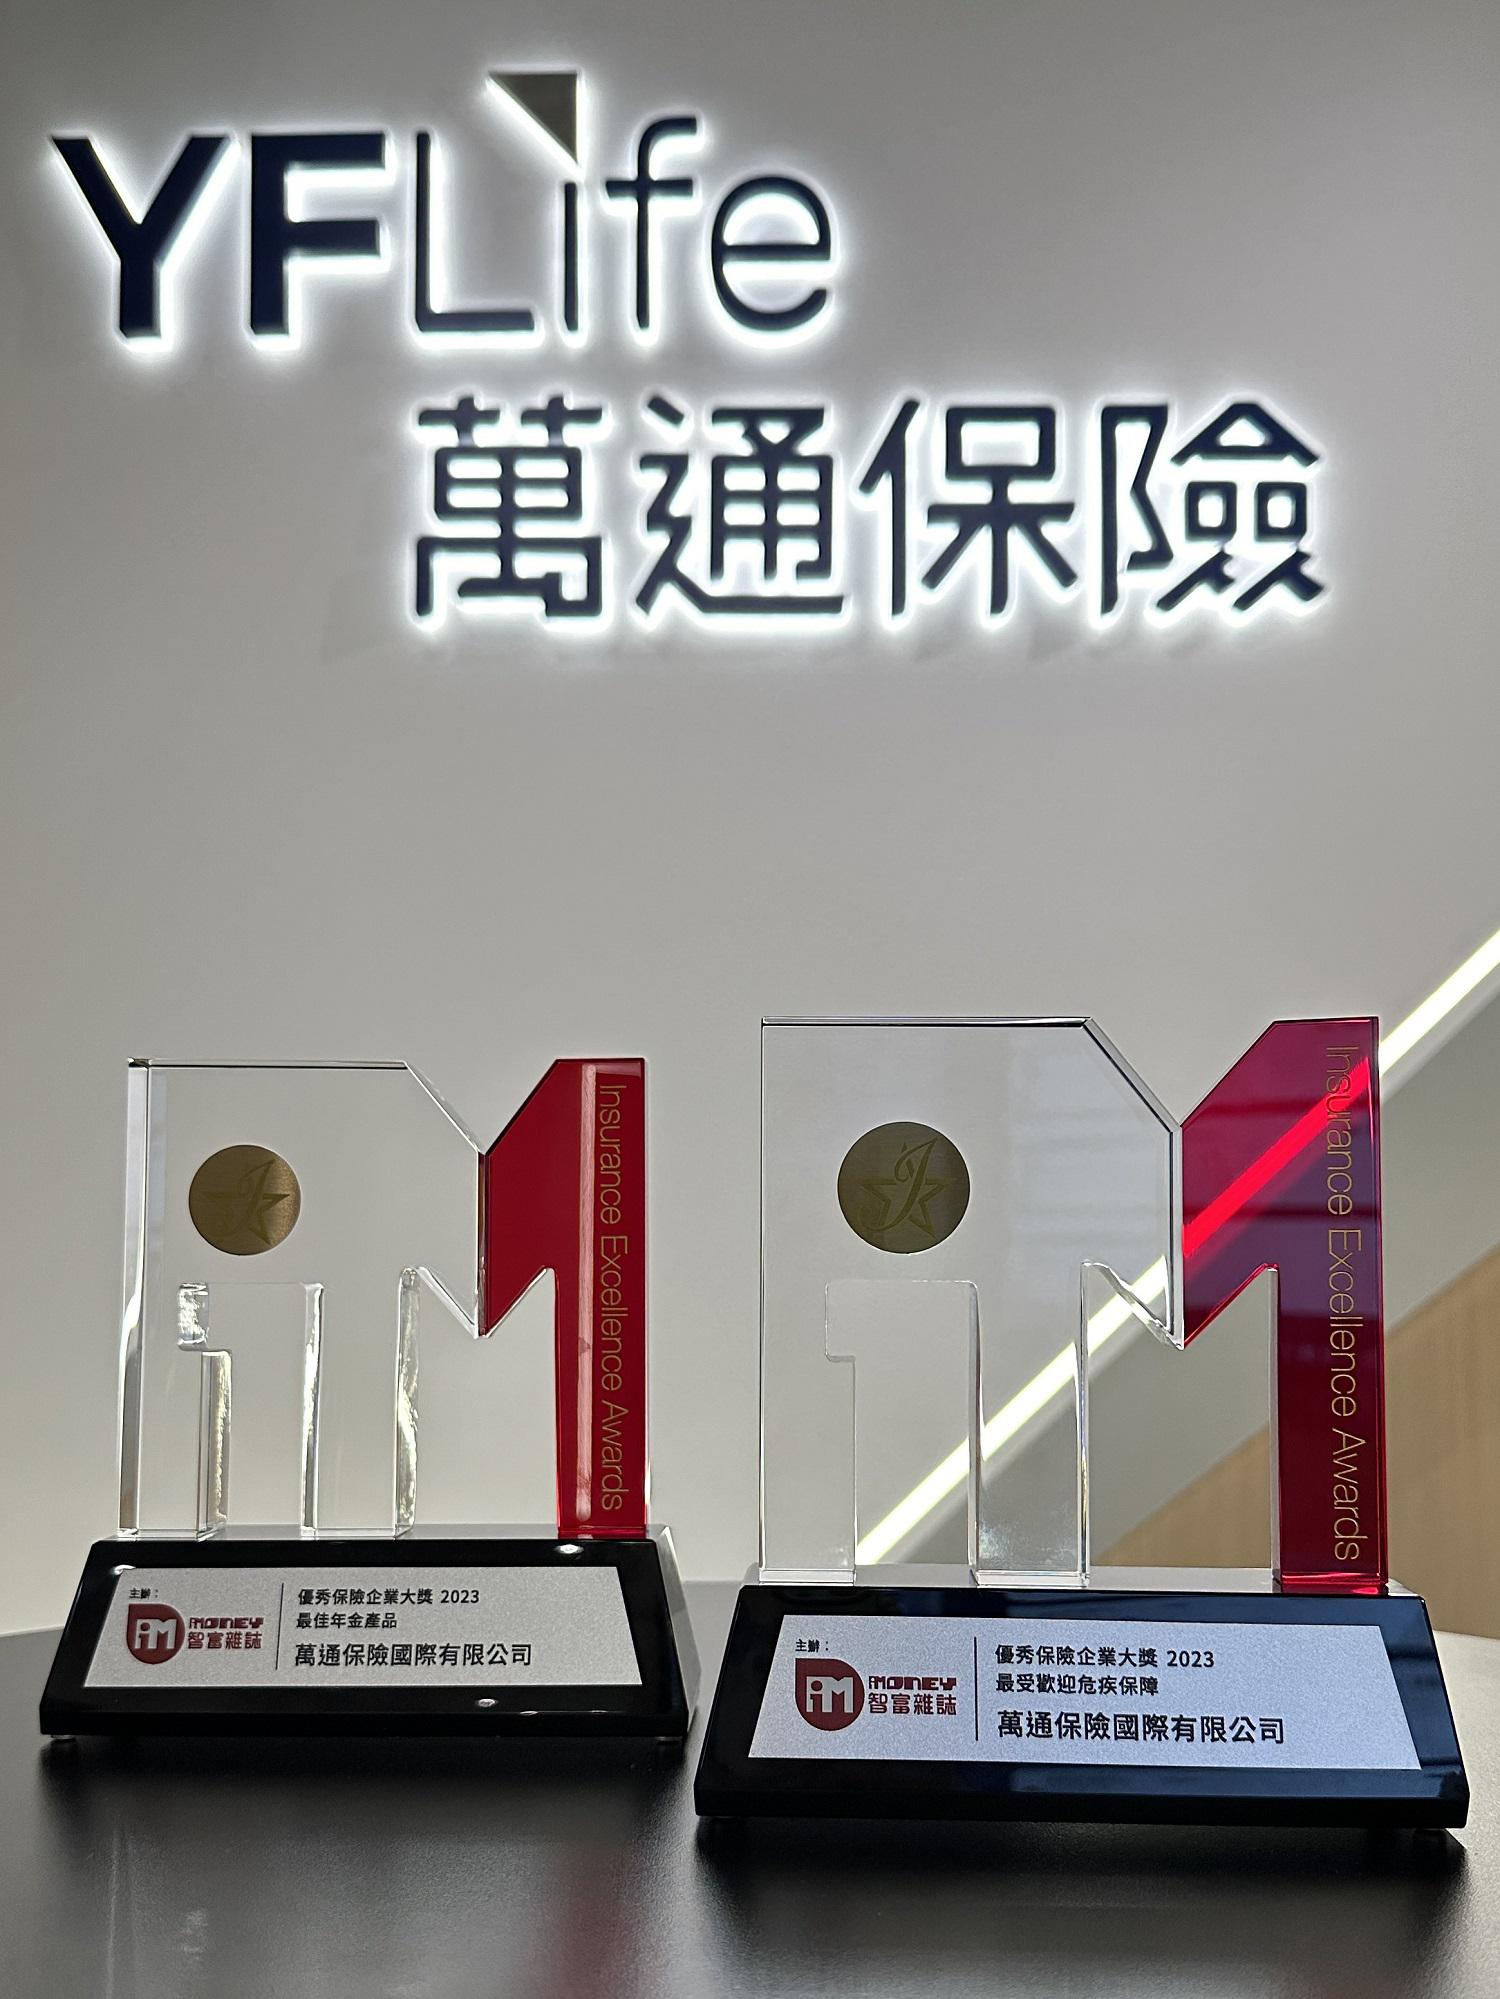 YF Life has won the “Best Annuity Product” award for 6 consecutive years, and the “Most Popular Critical Illness Insurance Product” award for 4 consecutive years.